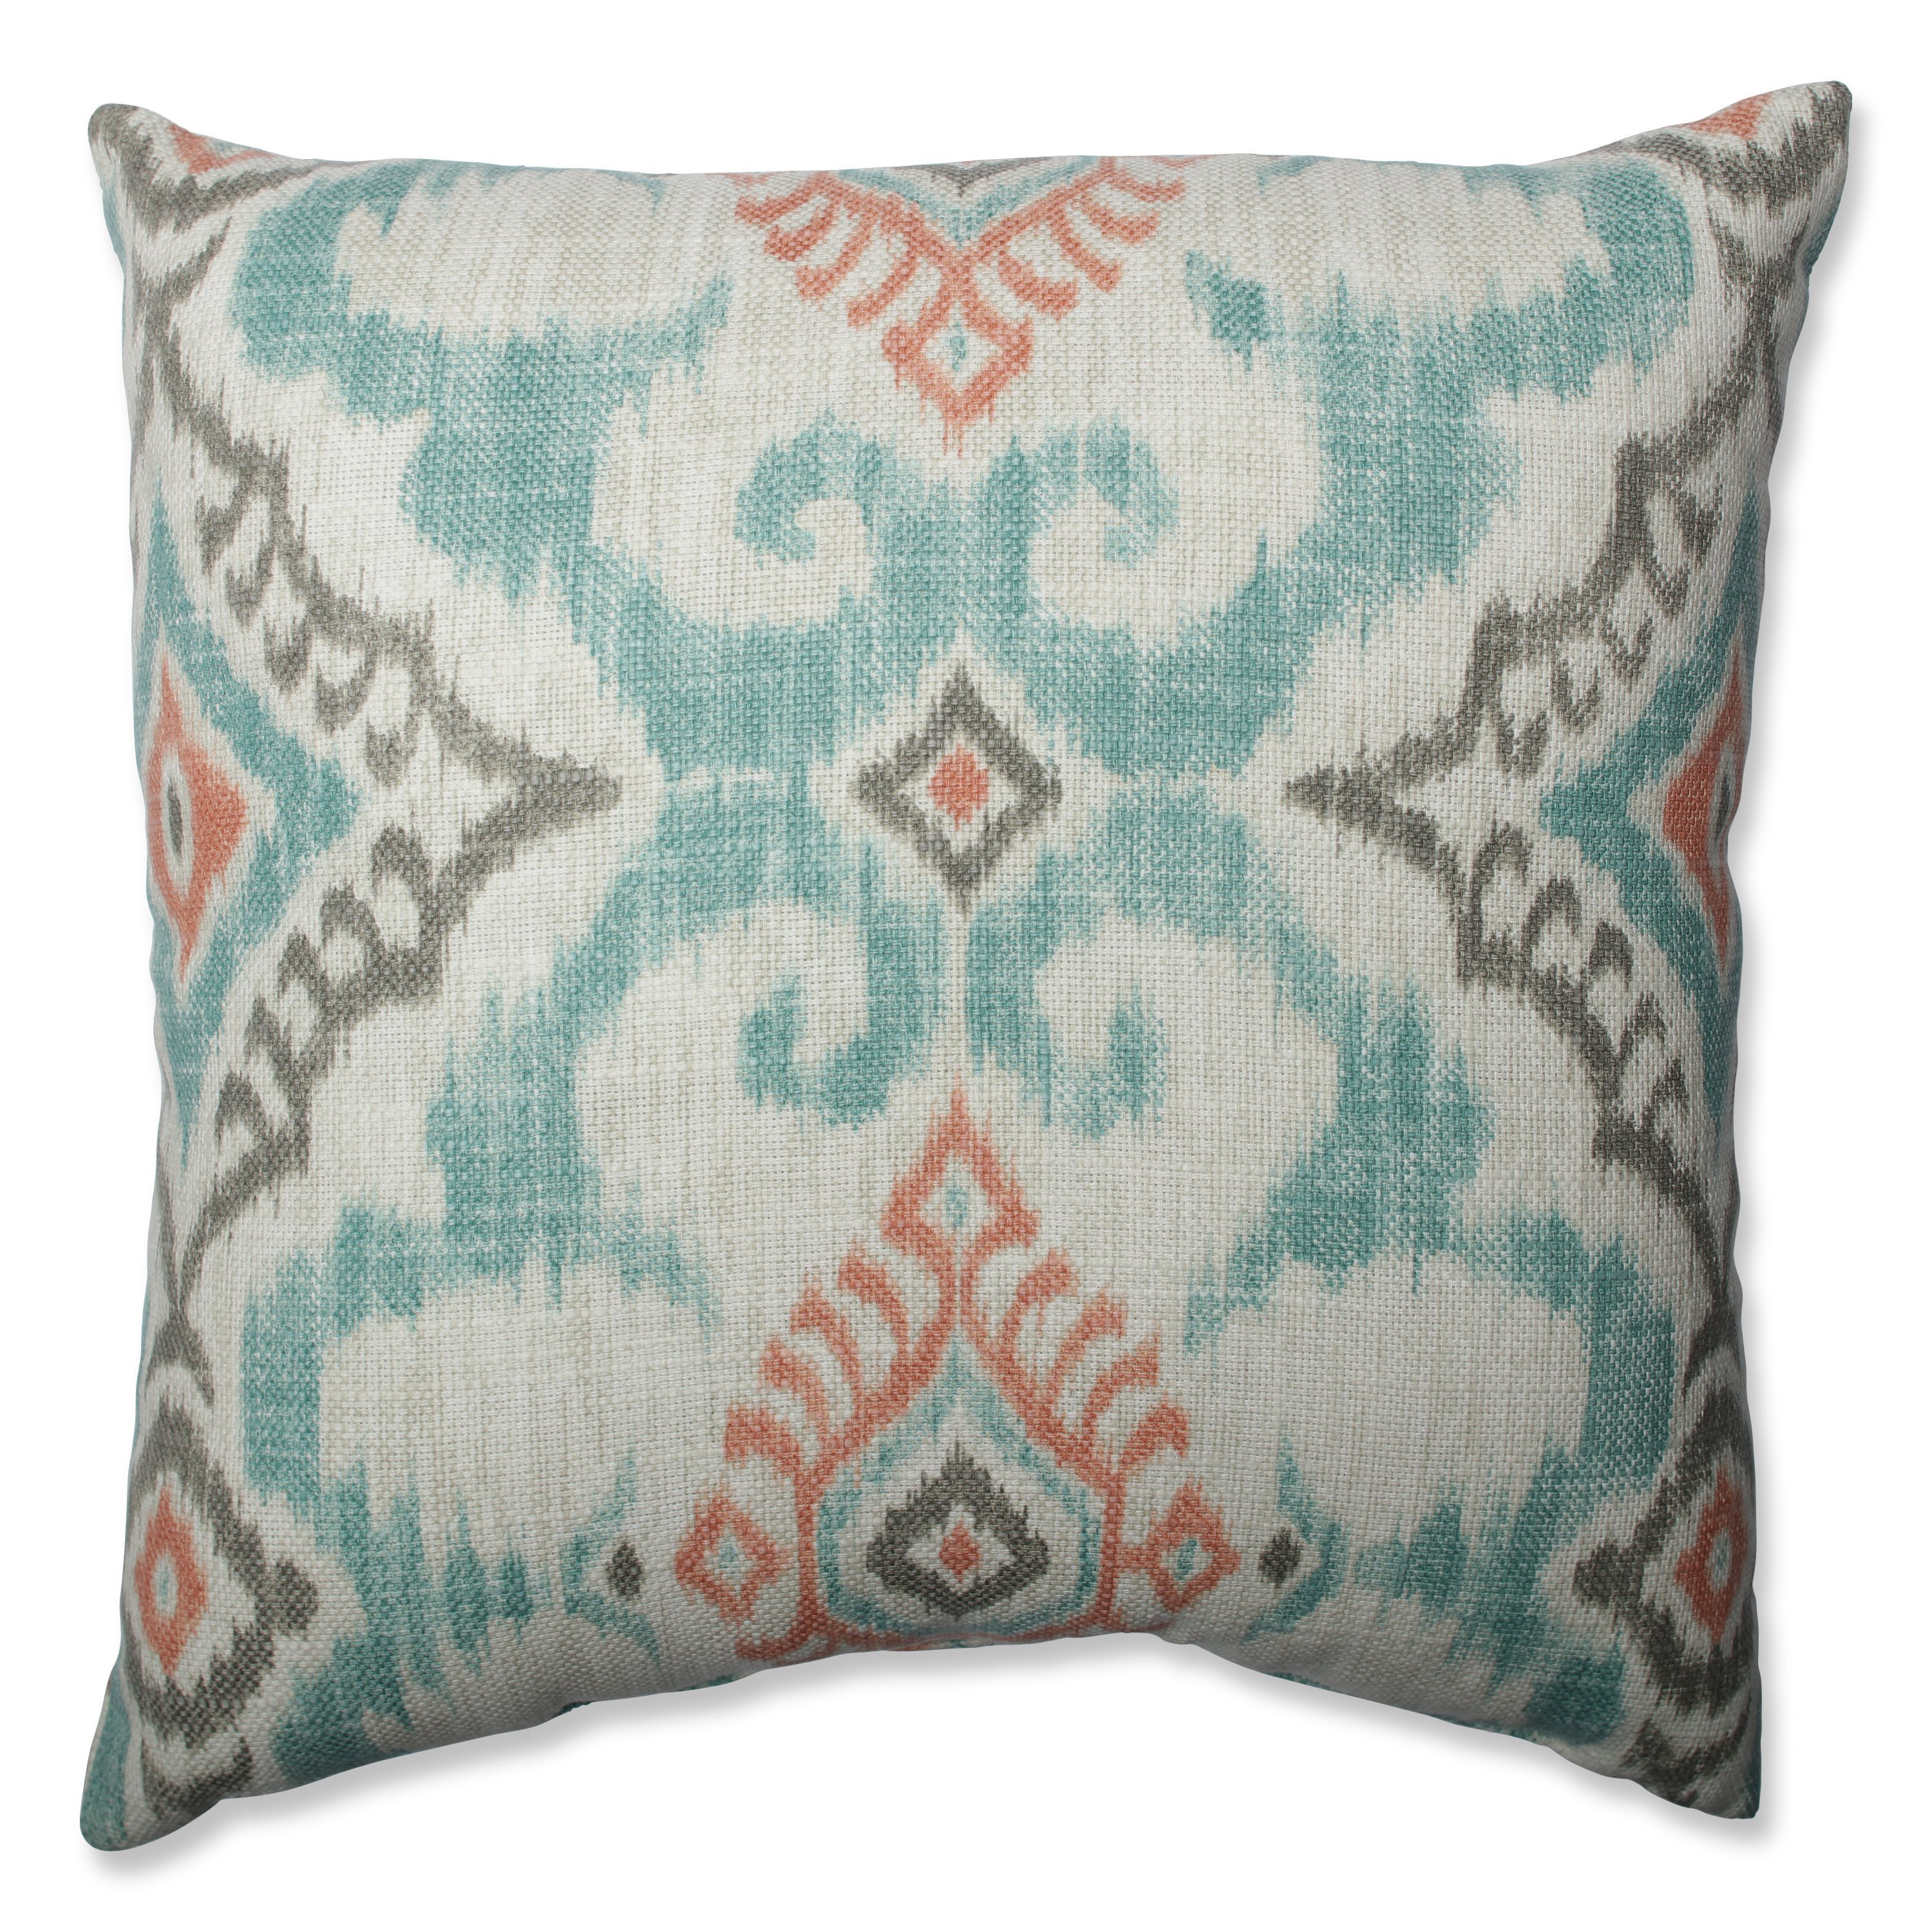 Shop The Curated Nomad Buena Vista Decorative Throw Pillow Free